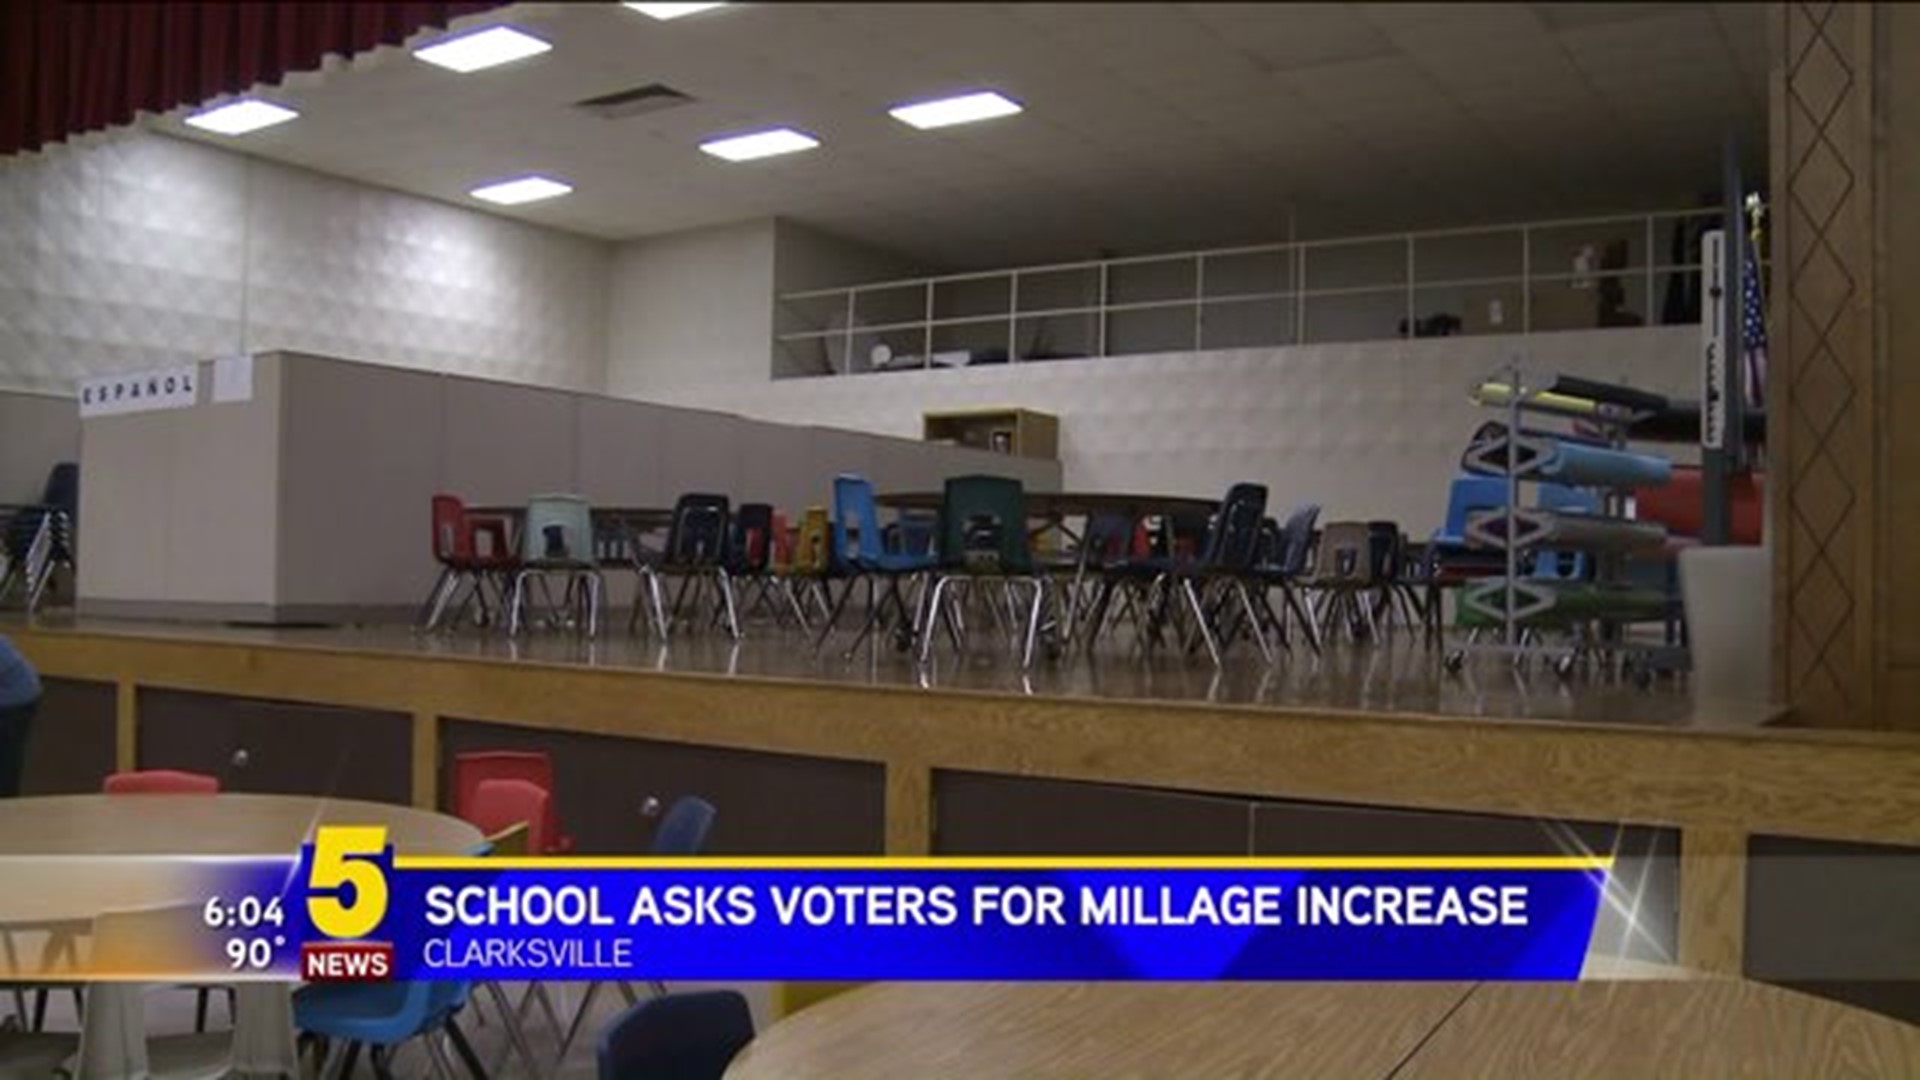 School Asks Voters For Millage Increase